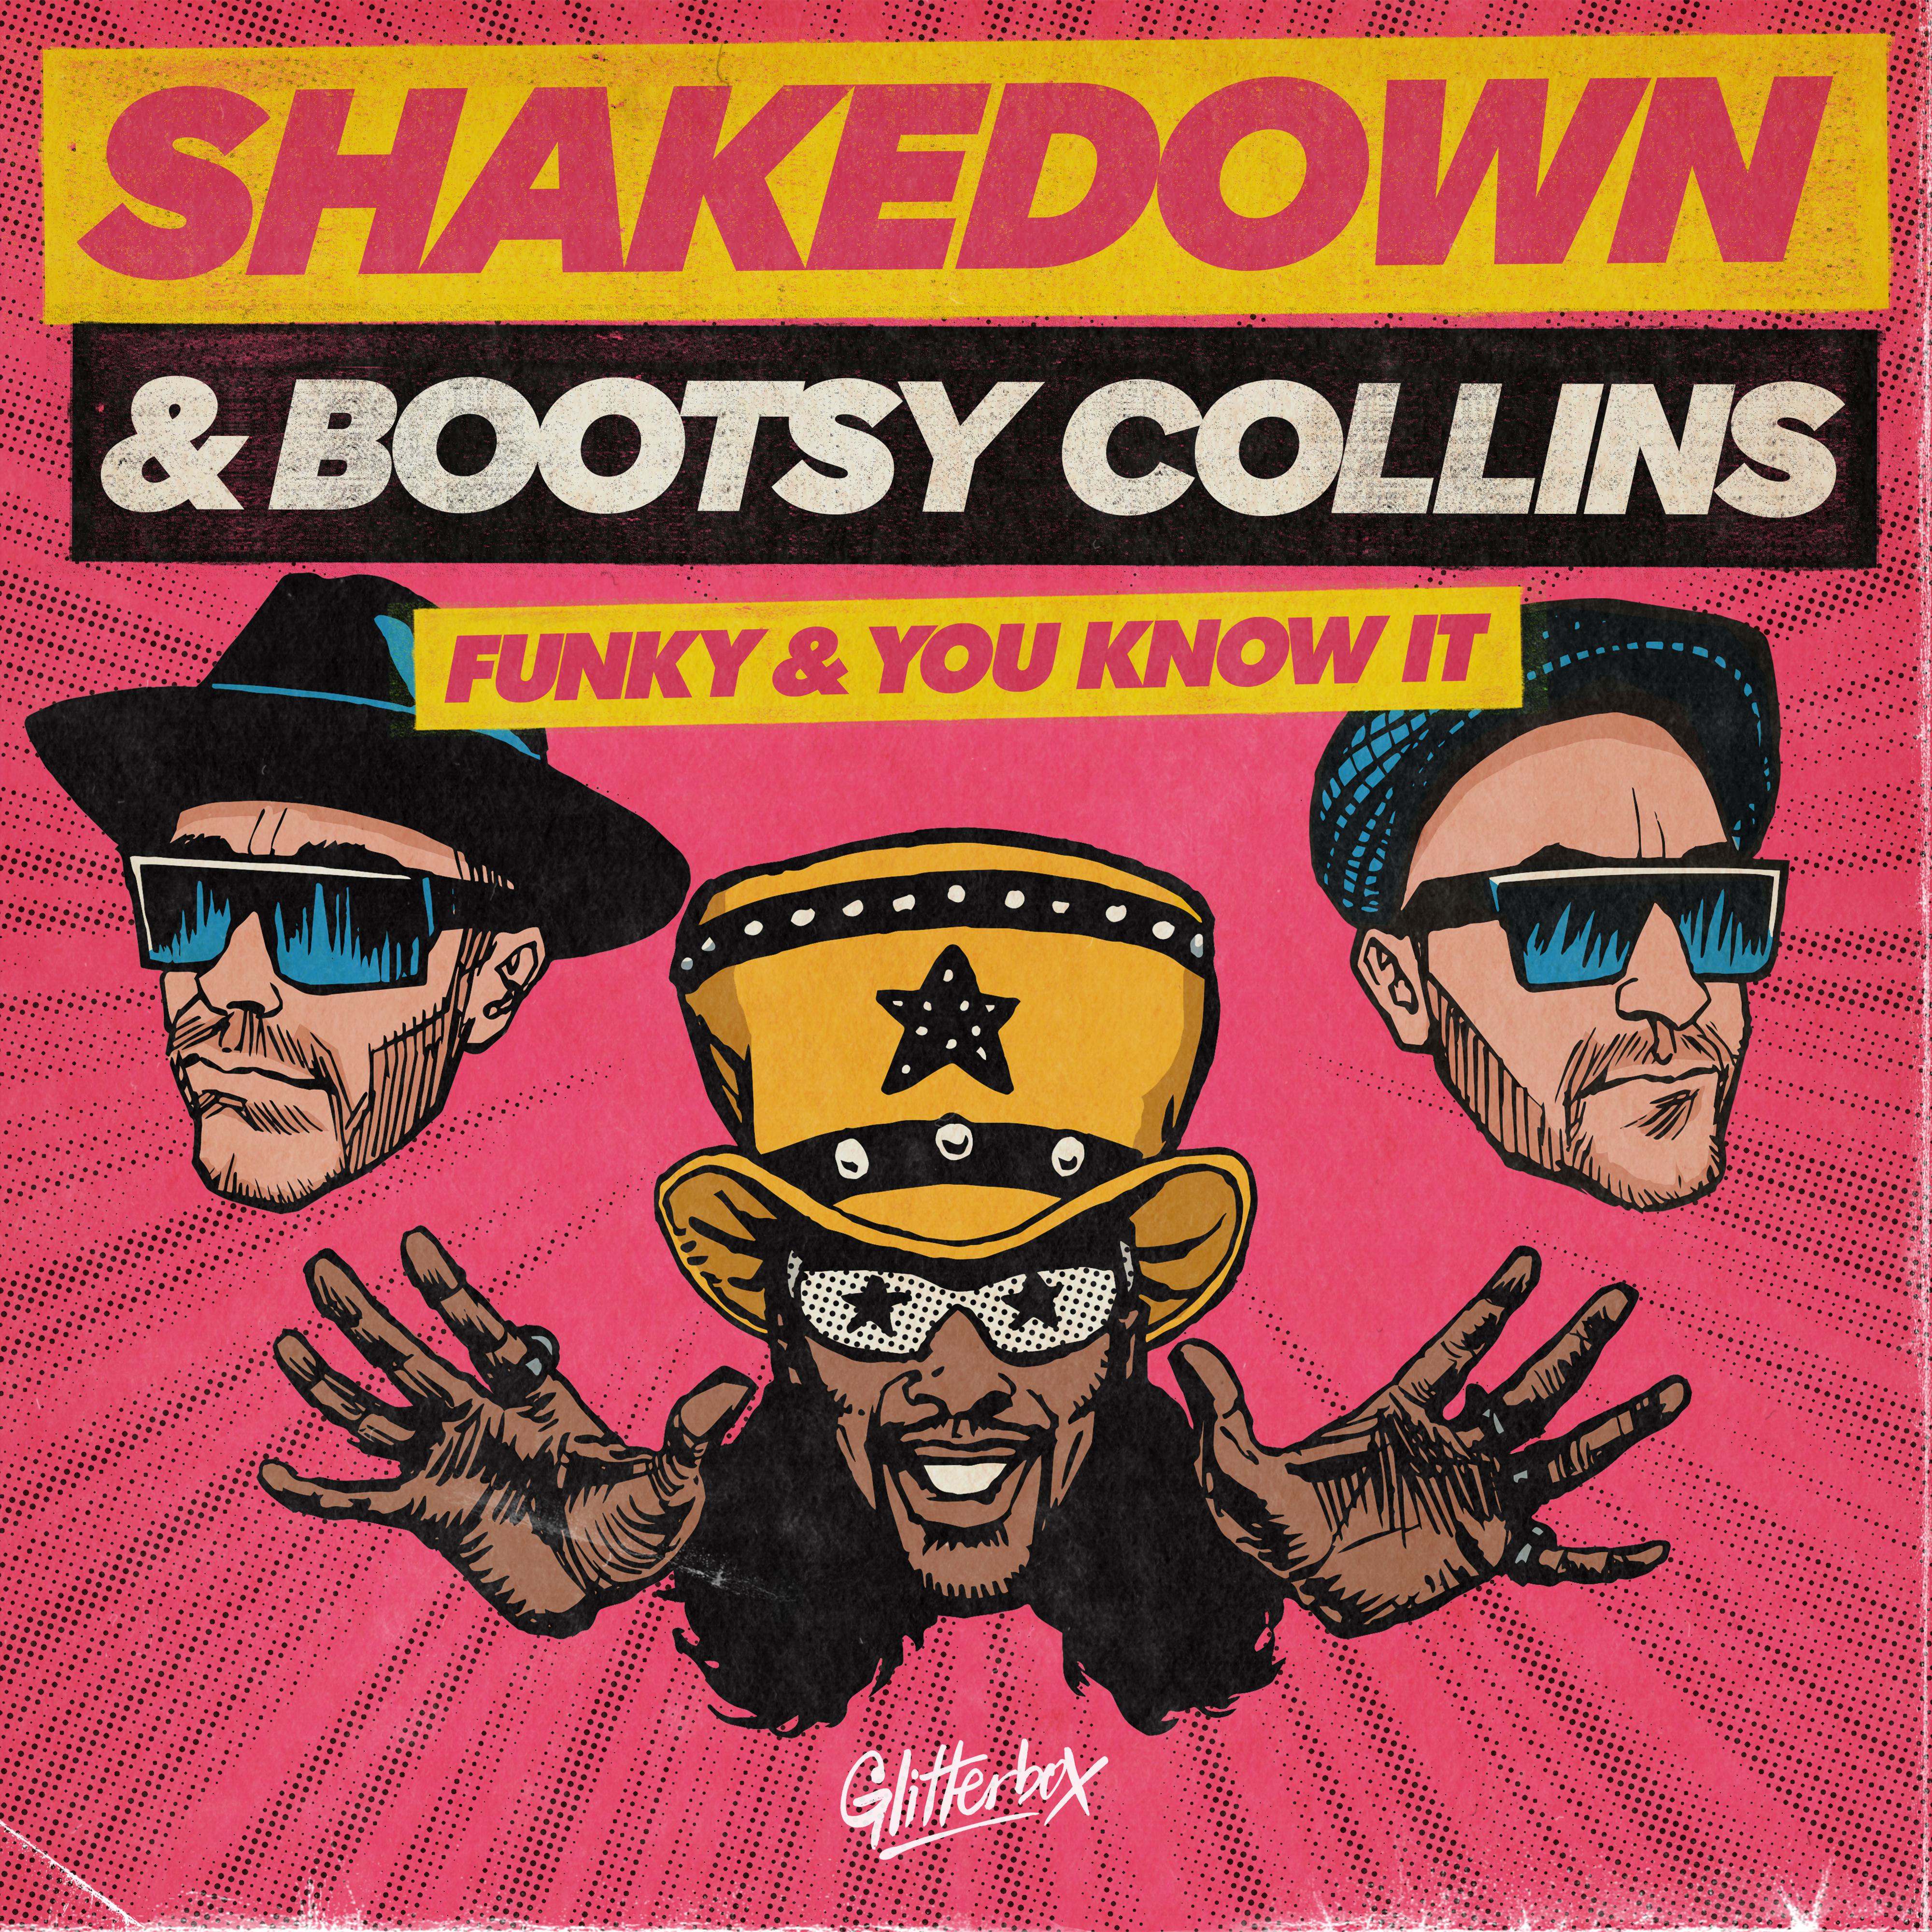 Shakedown - Funky And You Know It